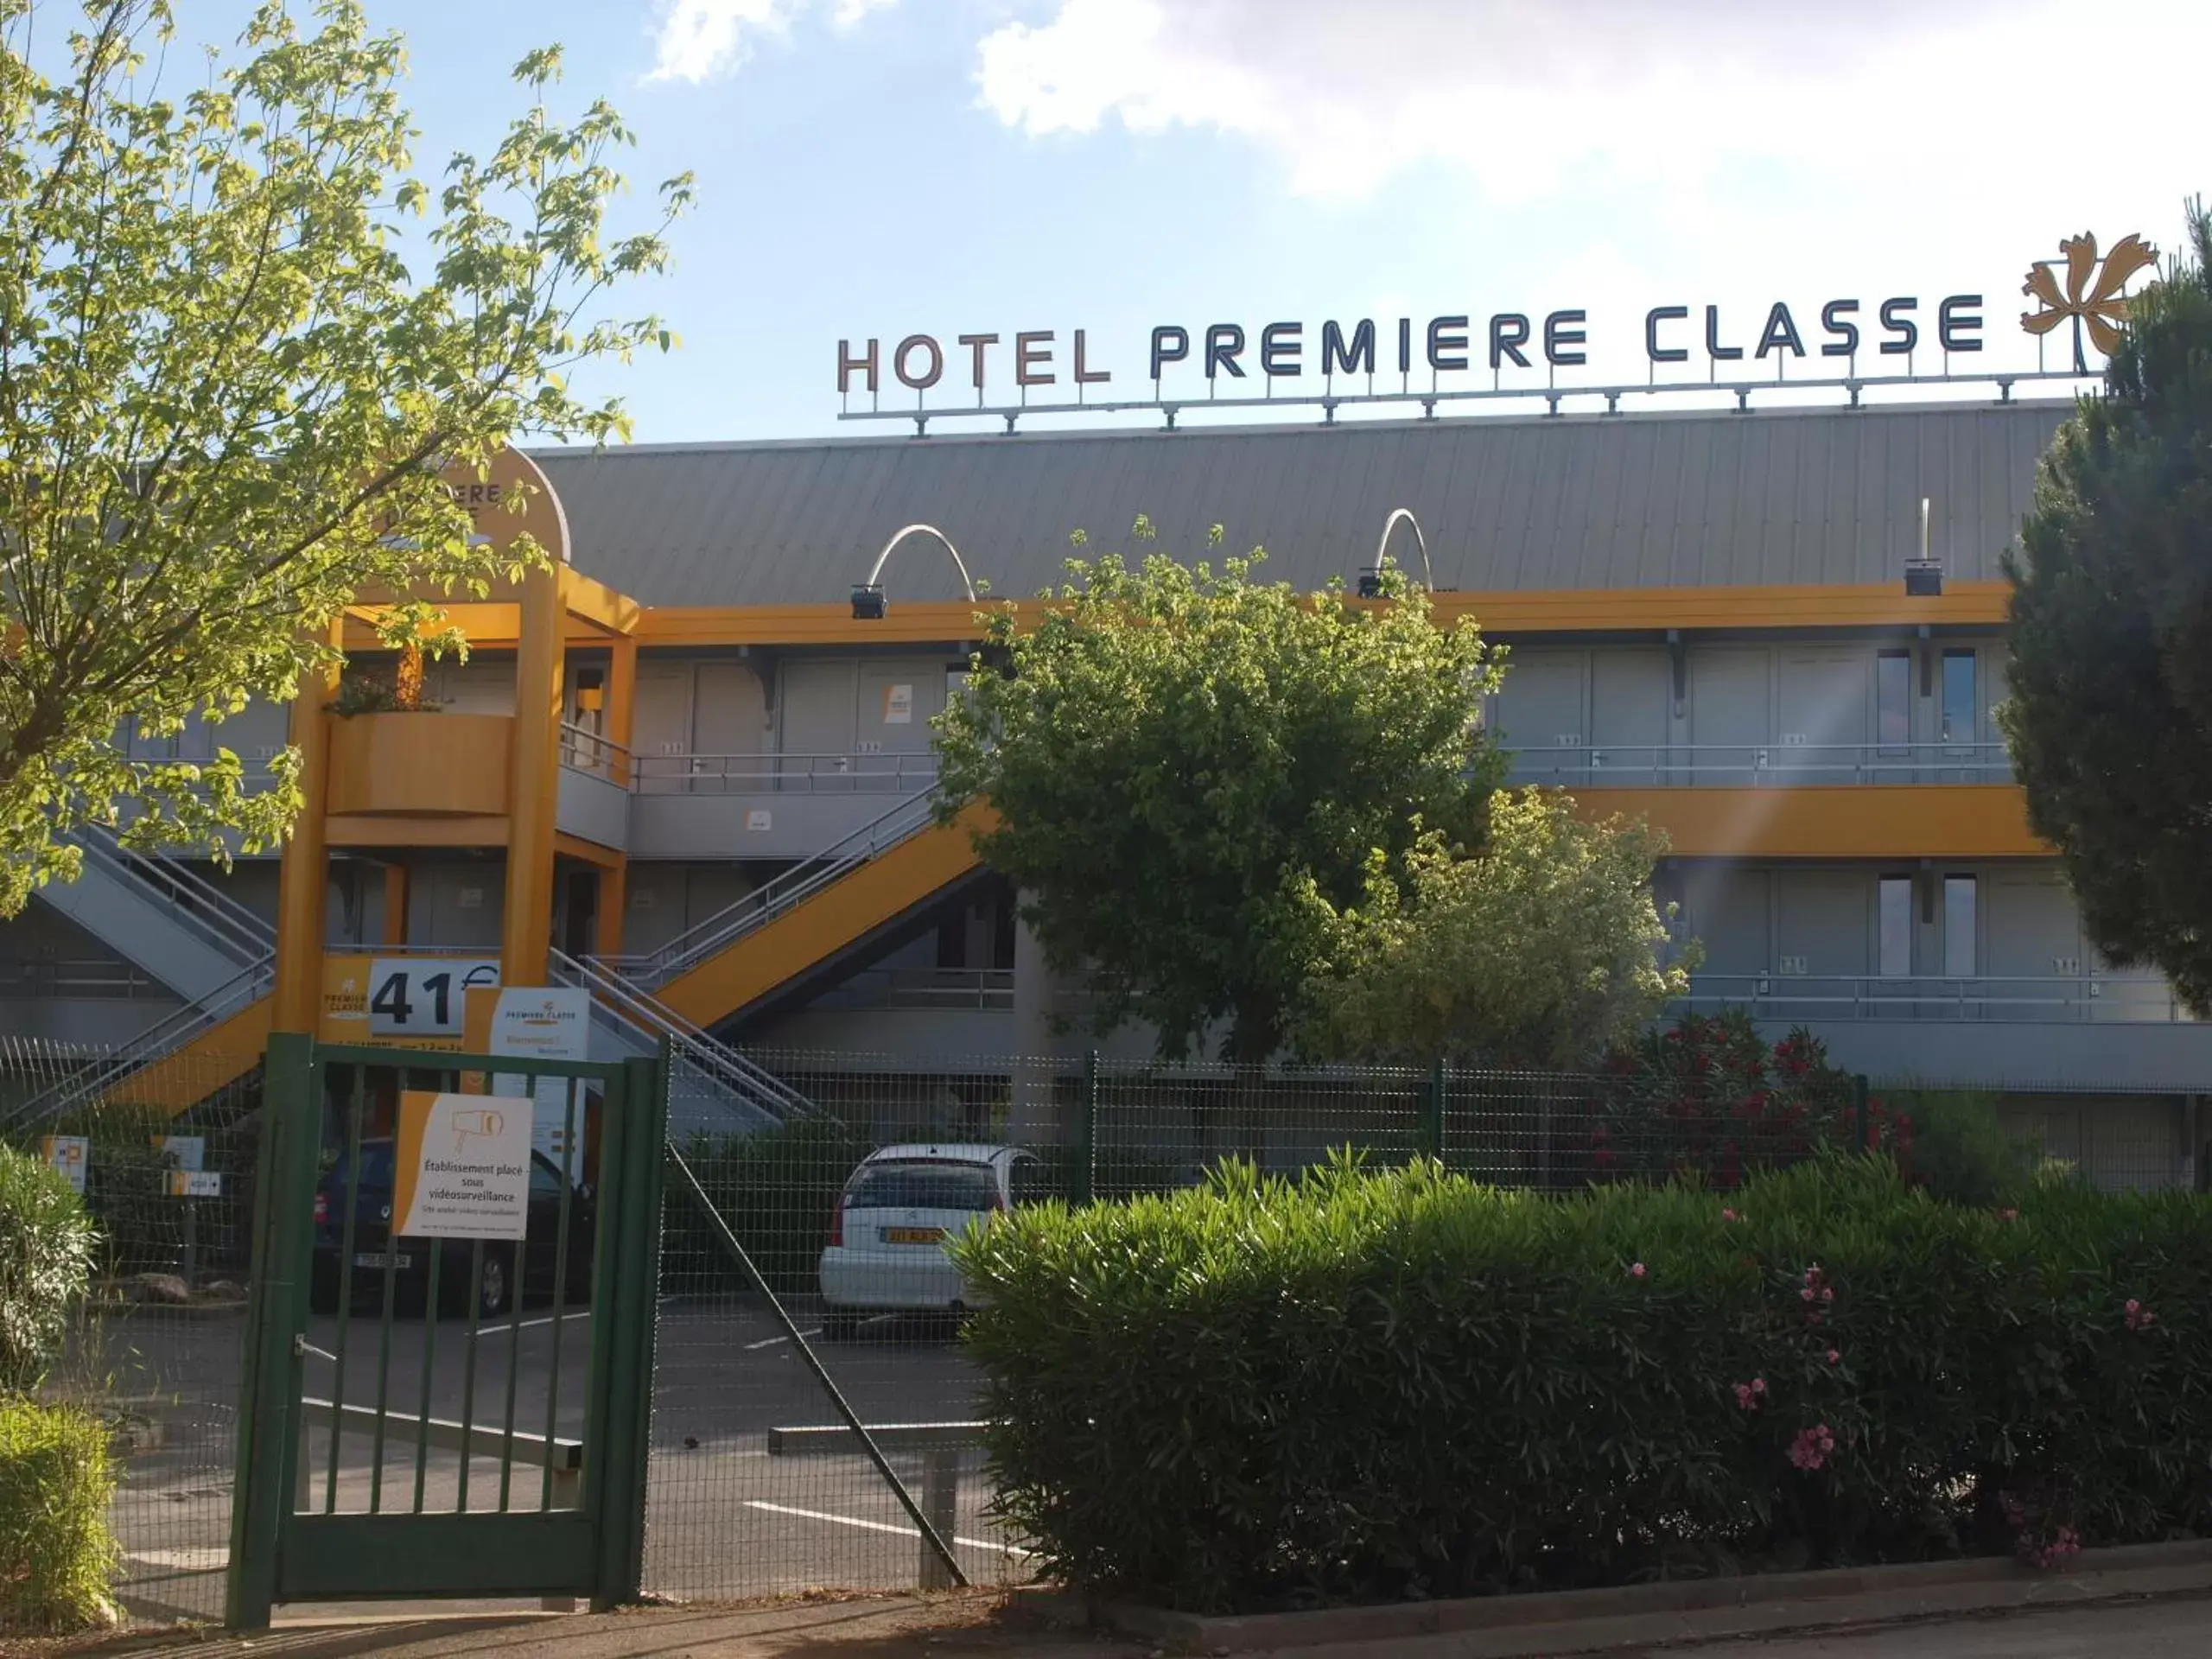 Property logo or sign in Premiere Classe Beziers